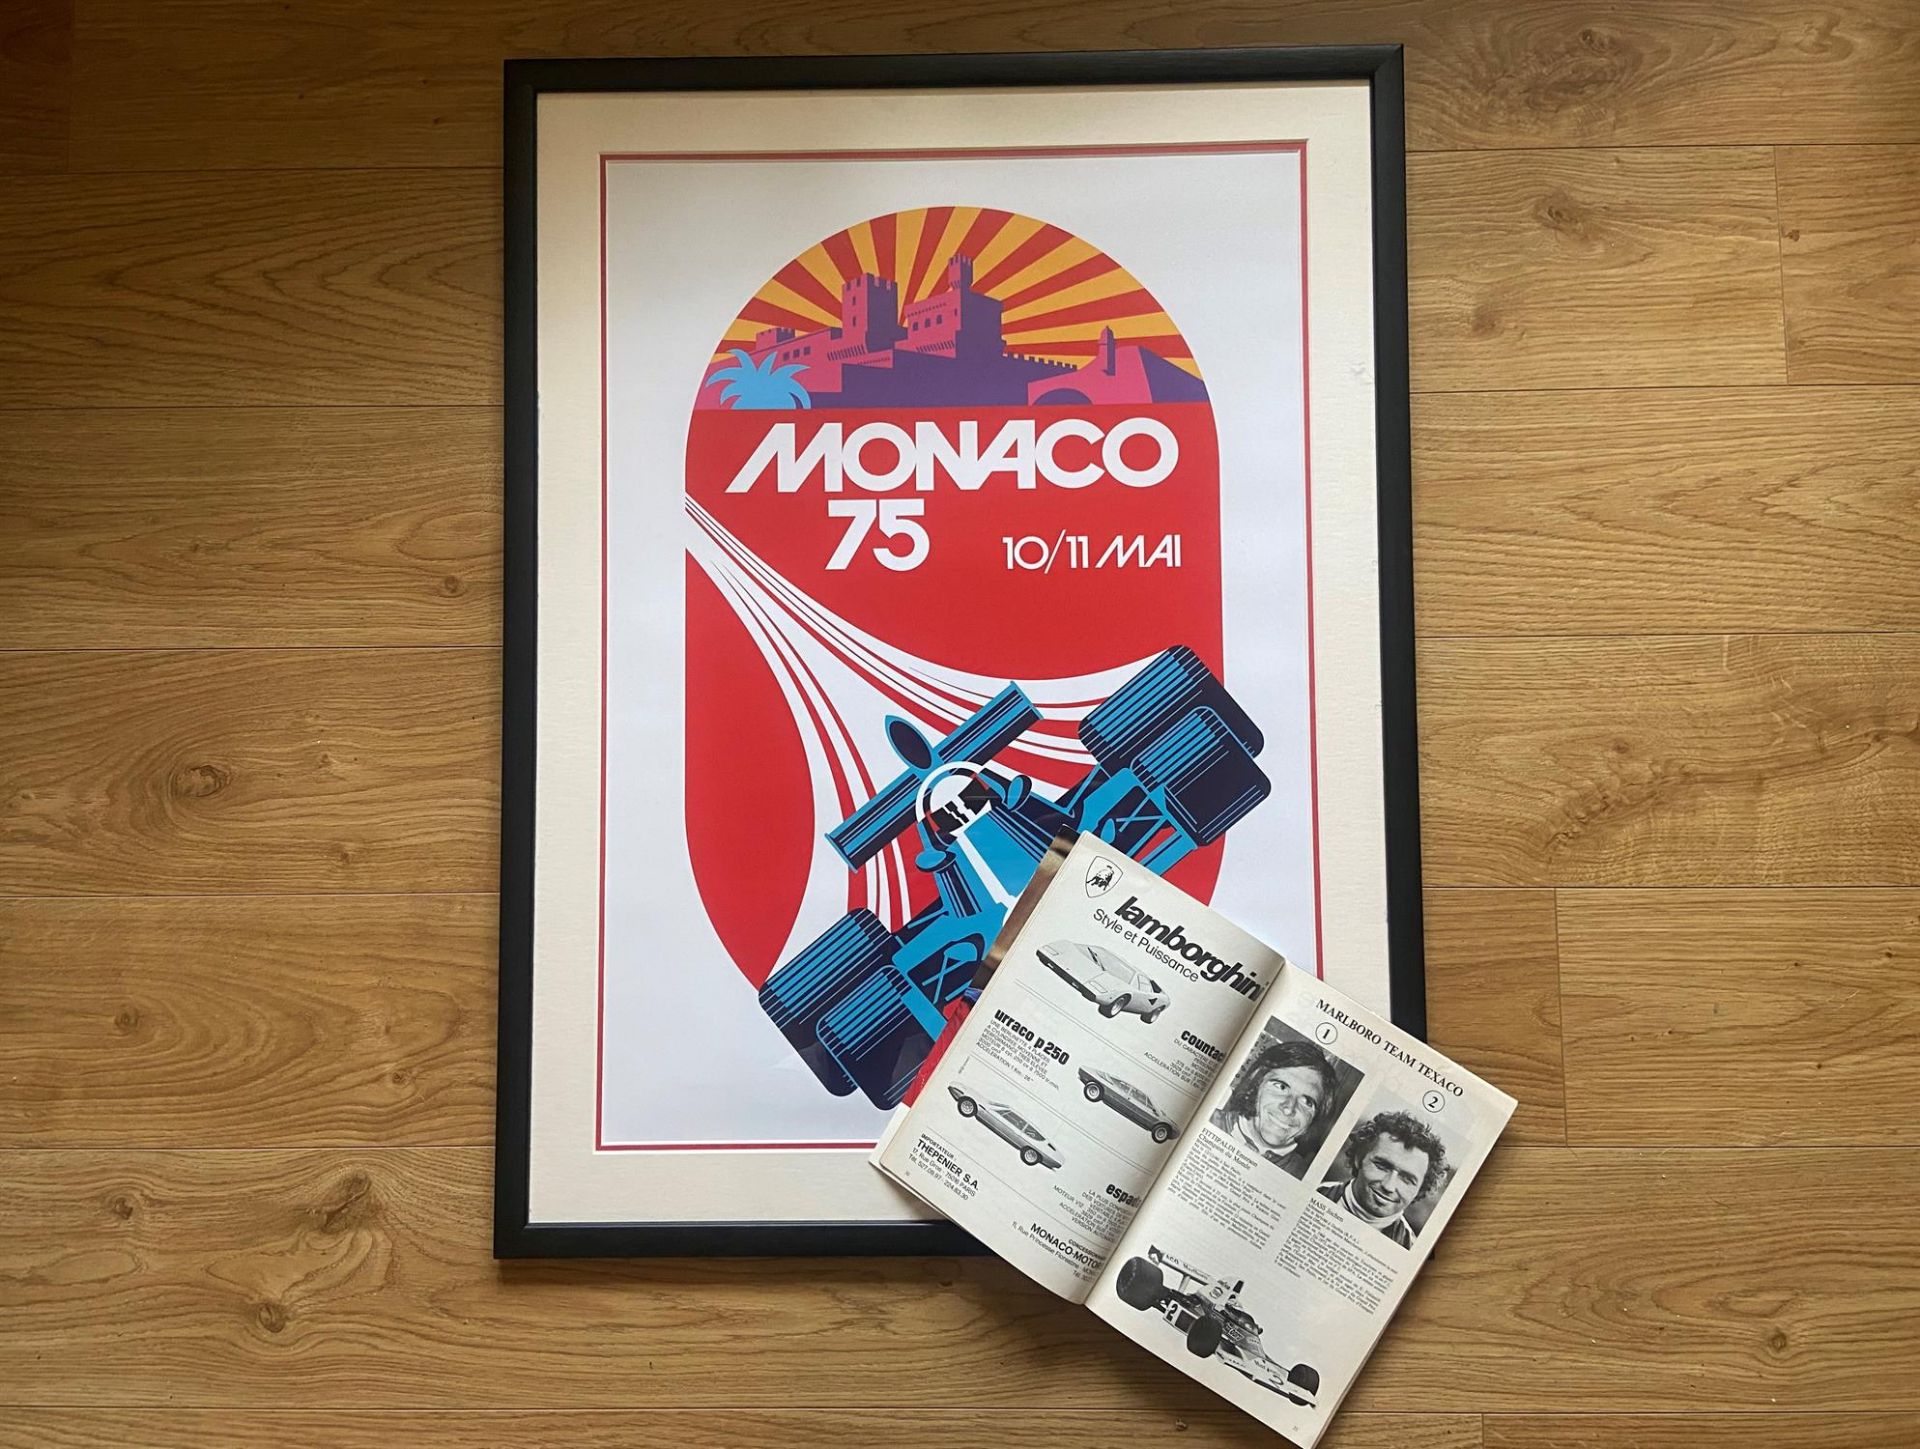 Framed '1975 Monaco Grand Prix' Poster with Original Official Programme* - Image 2 of 2